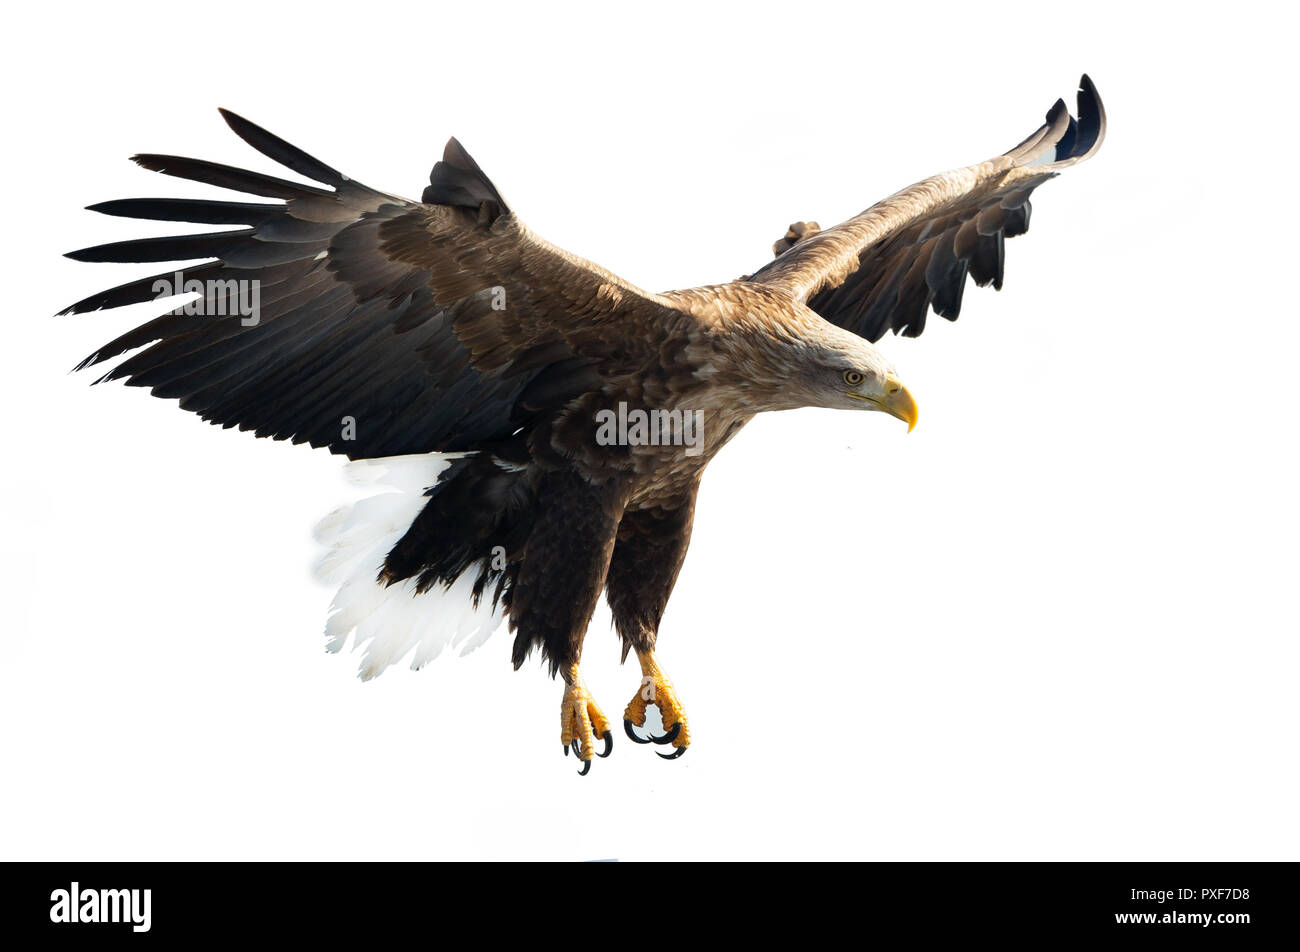 Adult White tailed eagle in flight. Isolated on White background. Scientific name: Haliaeetus albicilla, also known as the ern, erne, gray eagle, Eura Stock Photo